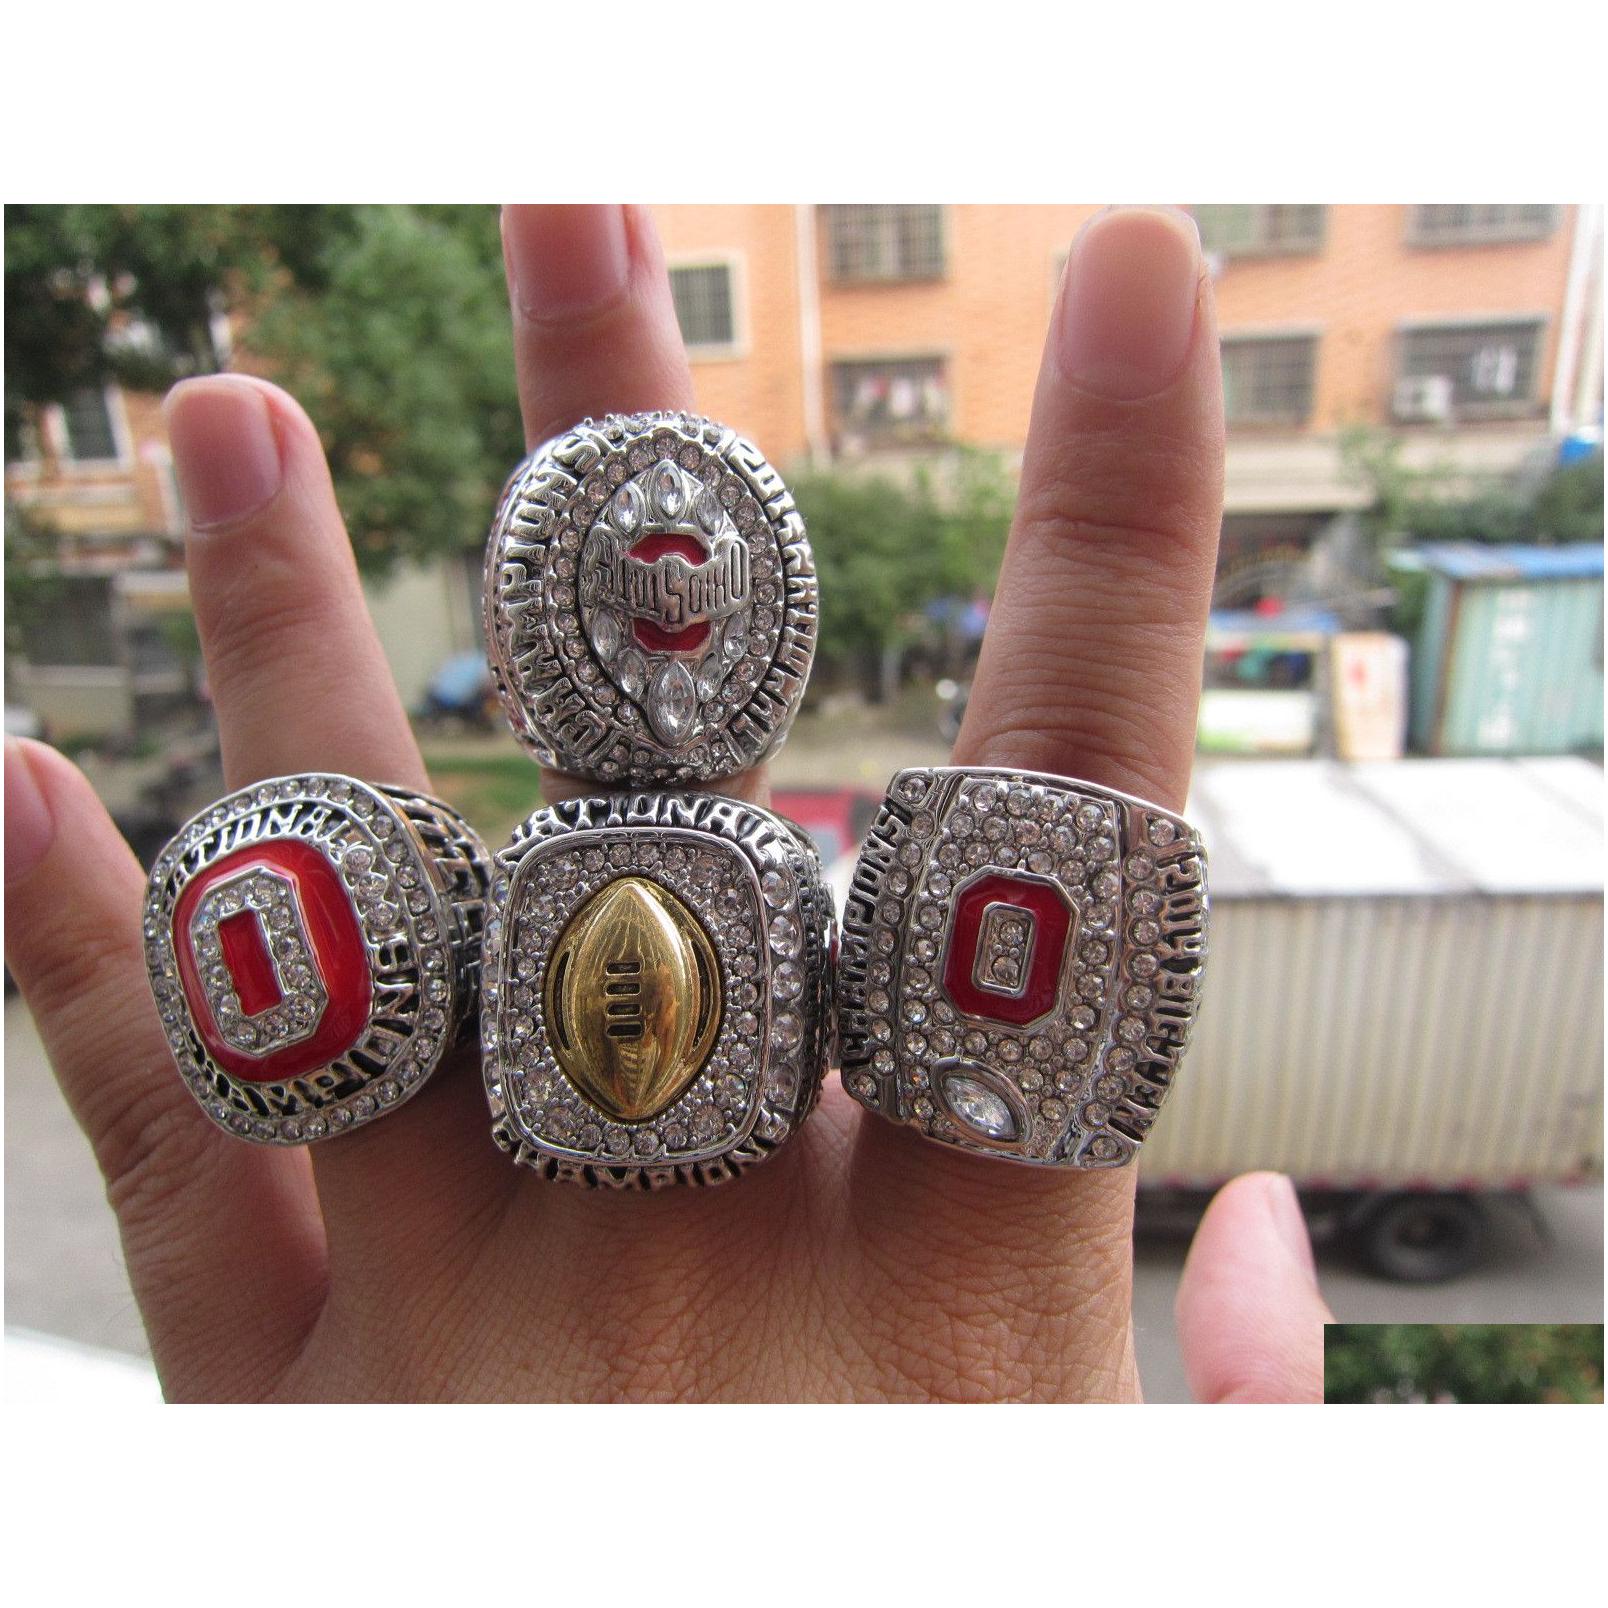 Cluster Rings Ohio State Football National Championship Ring With Wore Display Box Souvenir Men Fan Gift Wholesale Drop Deliver Dh hart